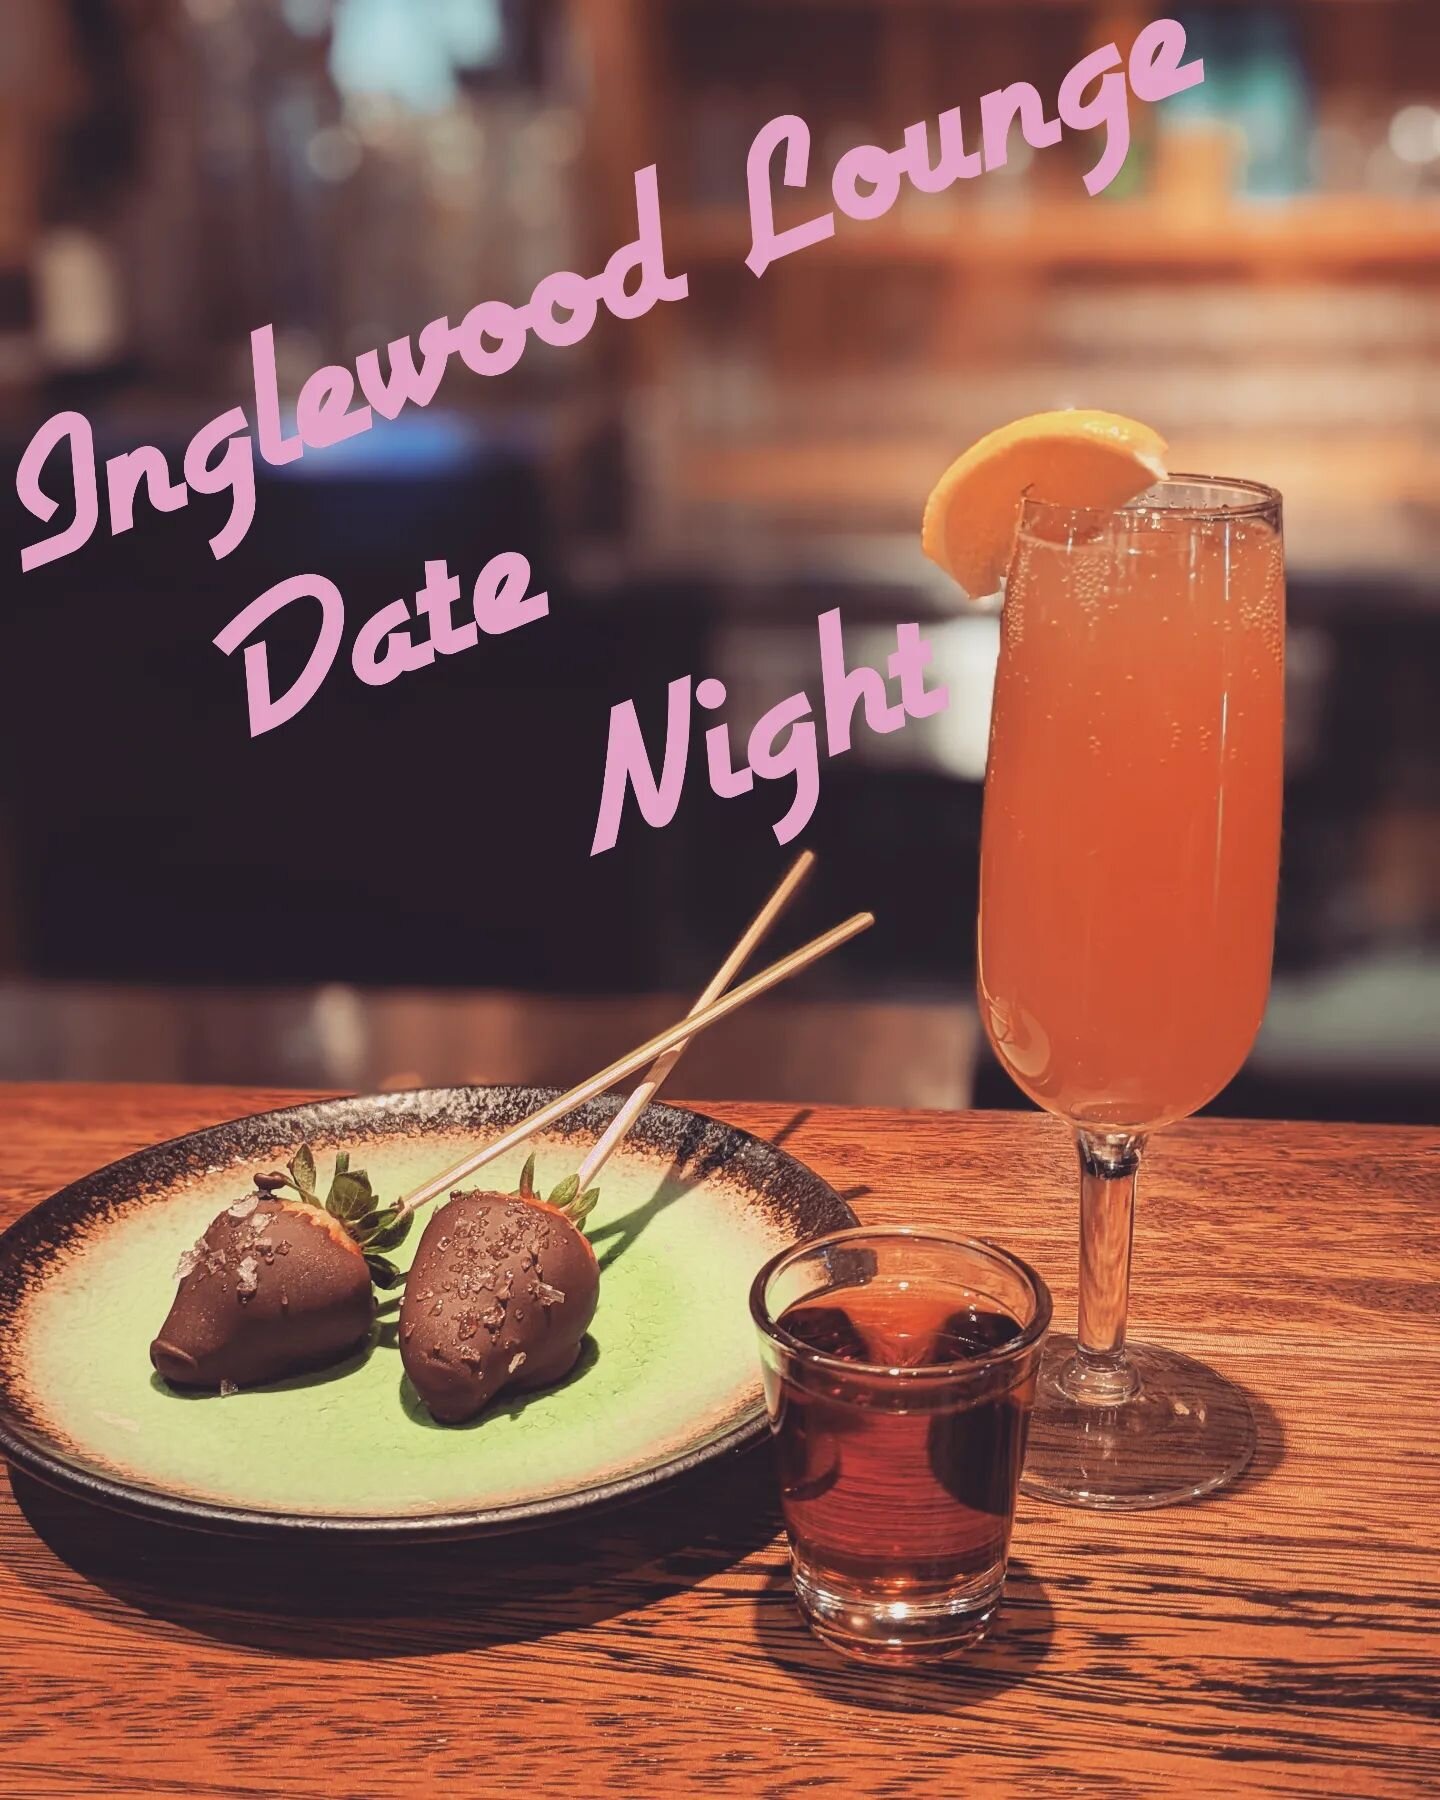 Treat yourself to a date tonight!  Bring a partner, bring a friend, or just bring yourself, everyone deserves a night out.

Drink and food specials, including some festive cocktails and chocolate covered strawberries, served all night long